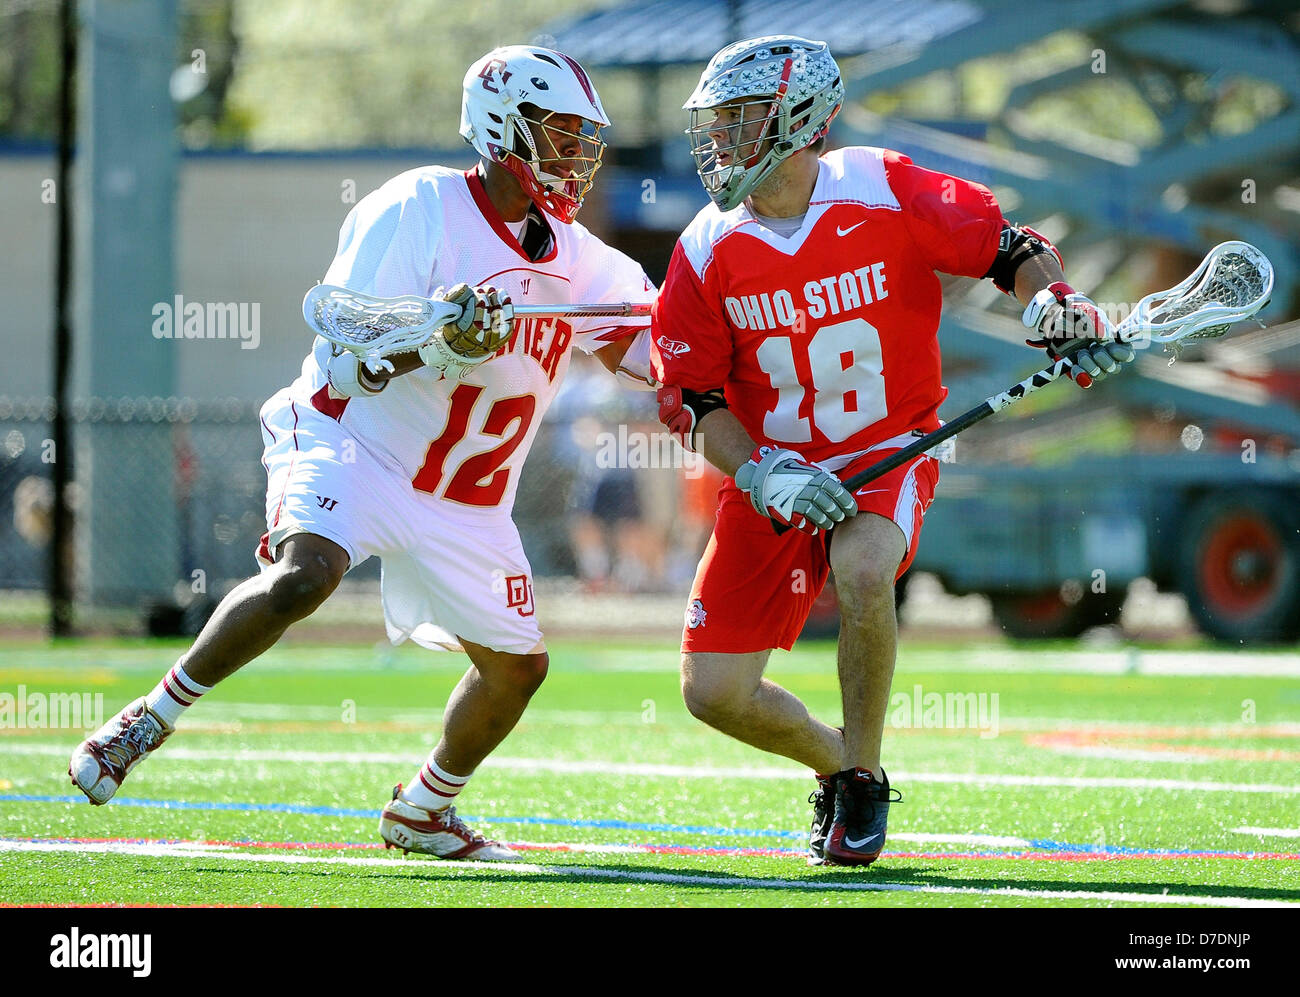 May 4, 2013 - Geneva, New York, USA - May 4, 2013: Ohio State Buckeyes attackman Logan Schuss #18 drives to the goal around Denver Pioneers midfielder Terry Ellis #12 during the second quarter of the 2013 ECAC Men's Lacrosse Tournament Championship game between the Ohio State Buckeyes and the Denver Pioneers at Boswell Field in Geneva, New York. Ohio State won the game 11-10. Stock Photo